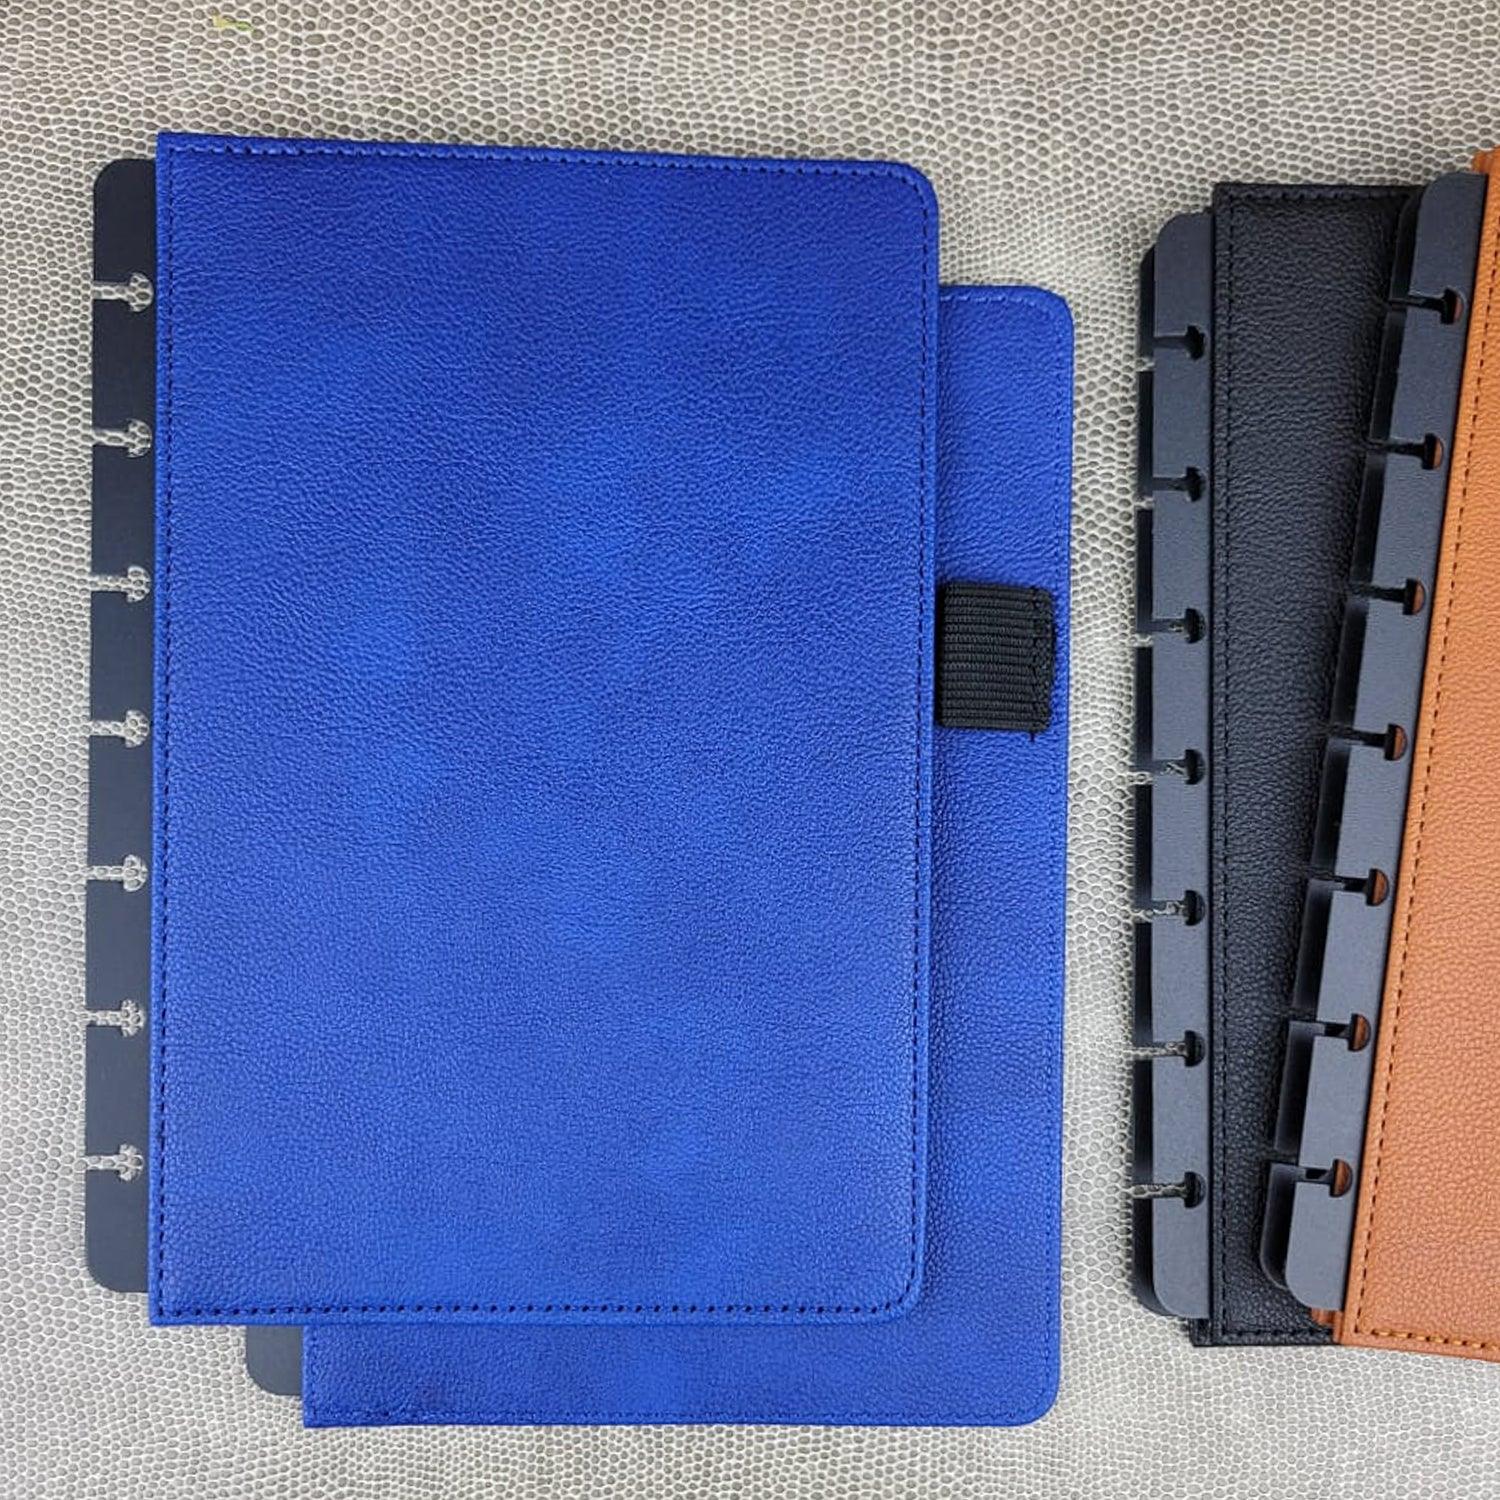 Franklin Covey Quest Blue Leather Planner Cover  Leather planner cover,  Leather planner, Blue leather